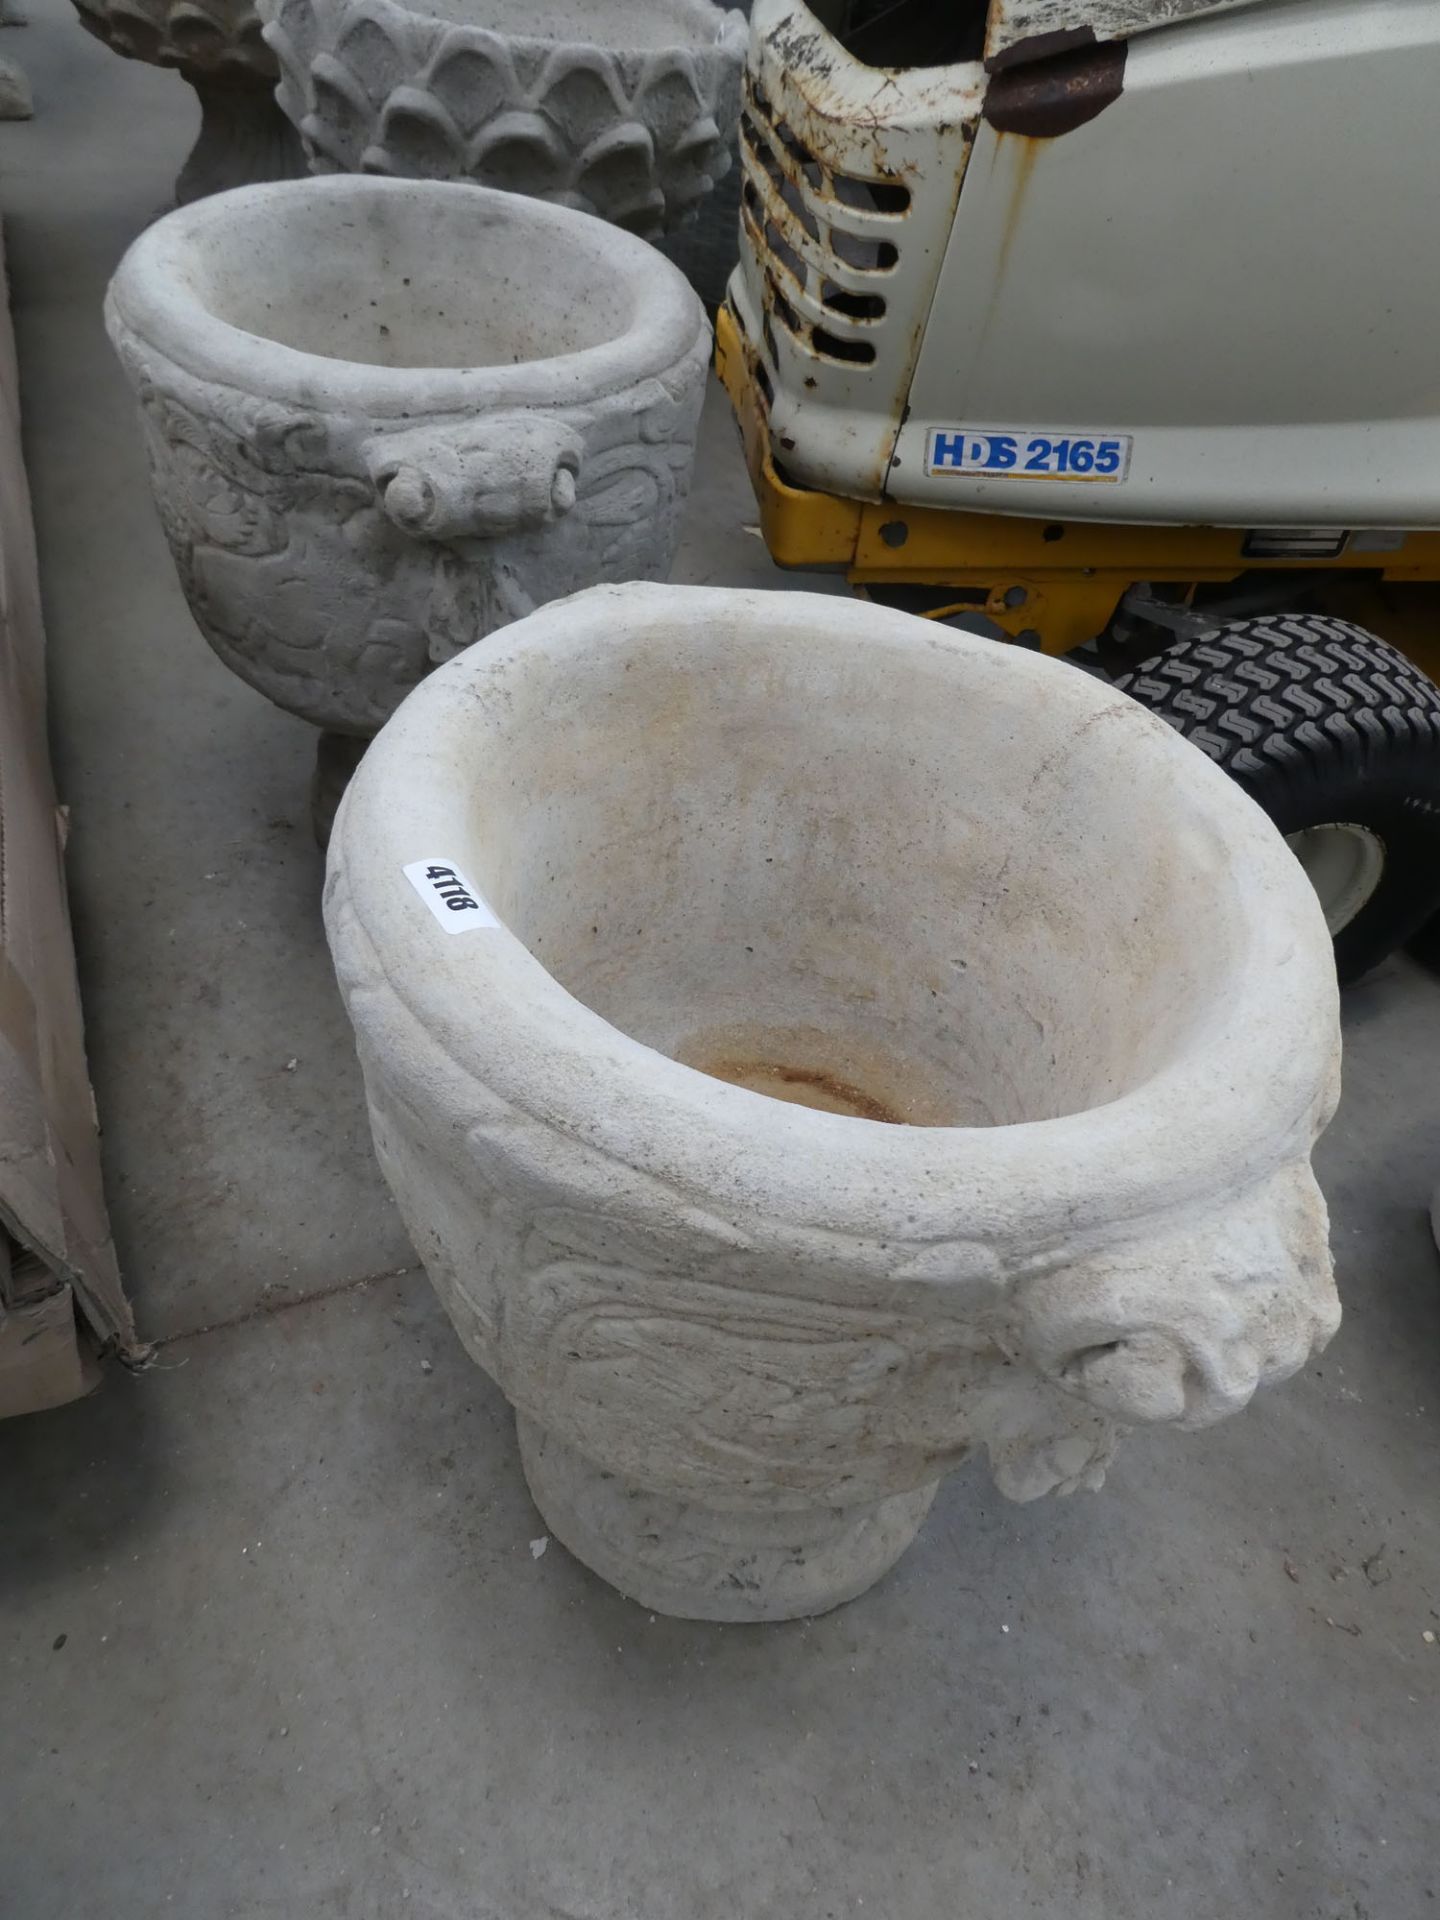 2 round concrete pots on stand